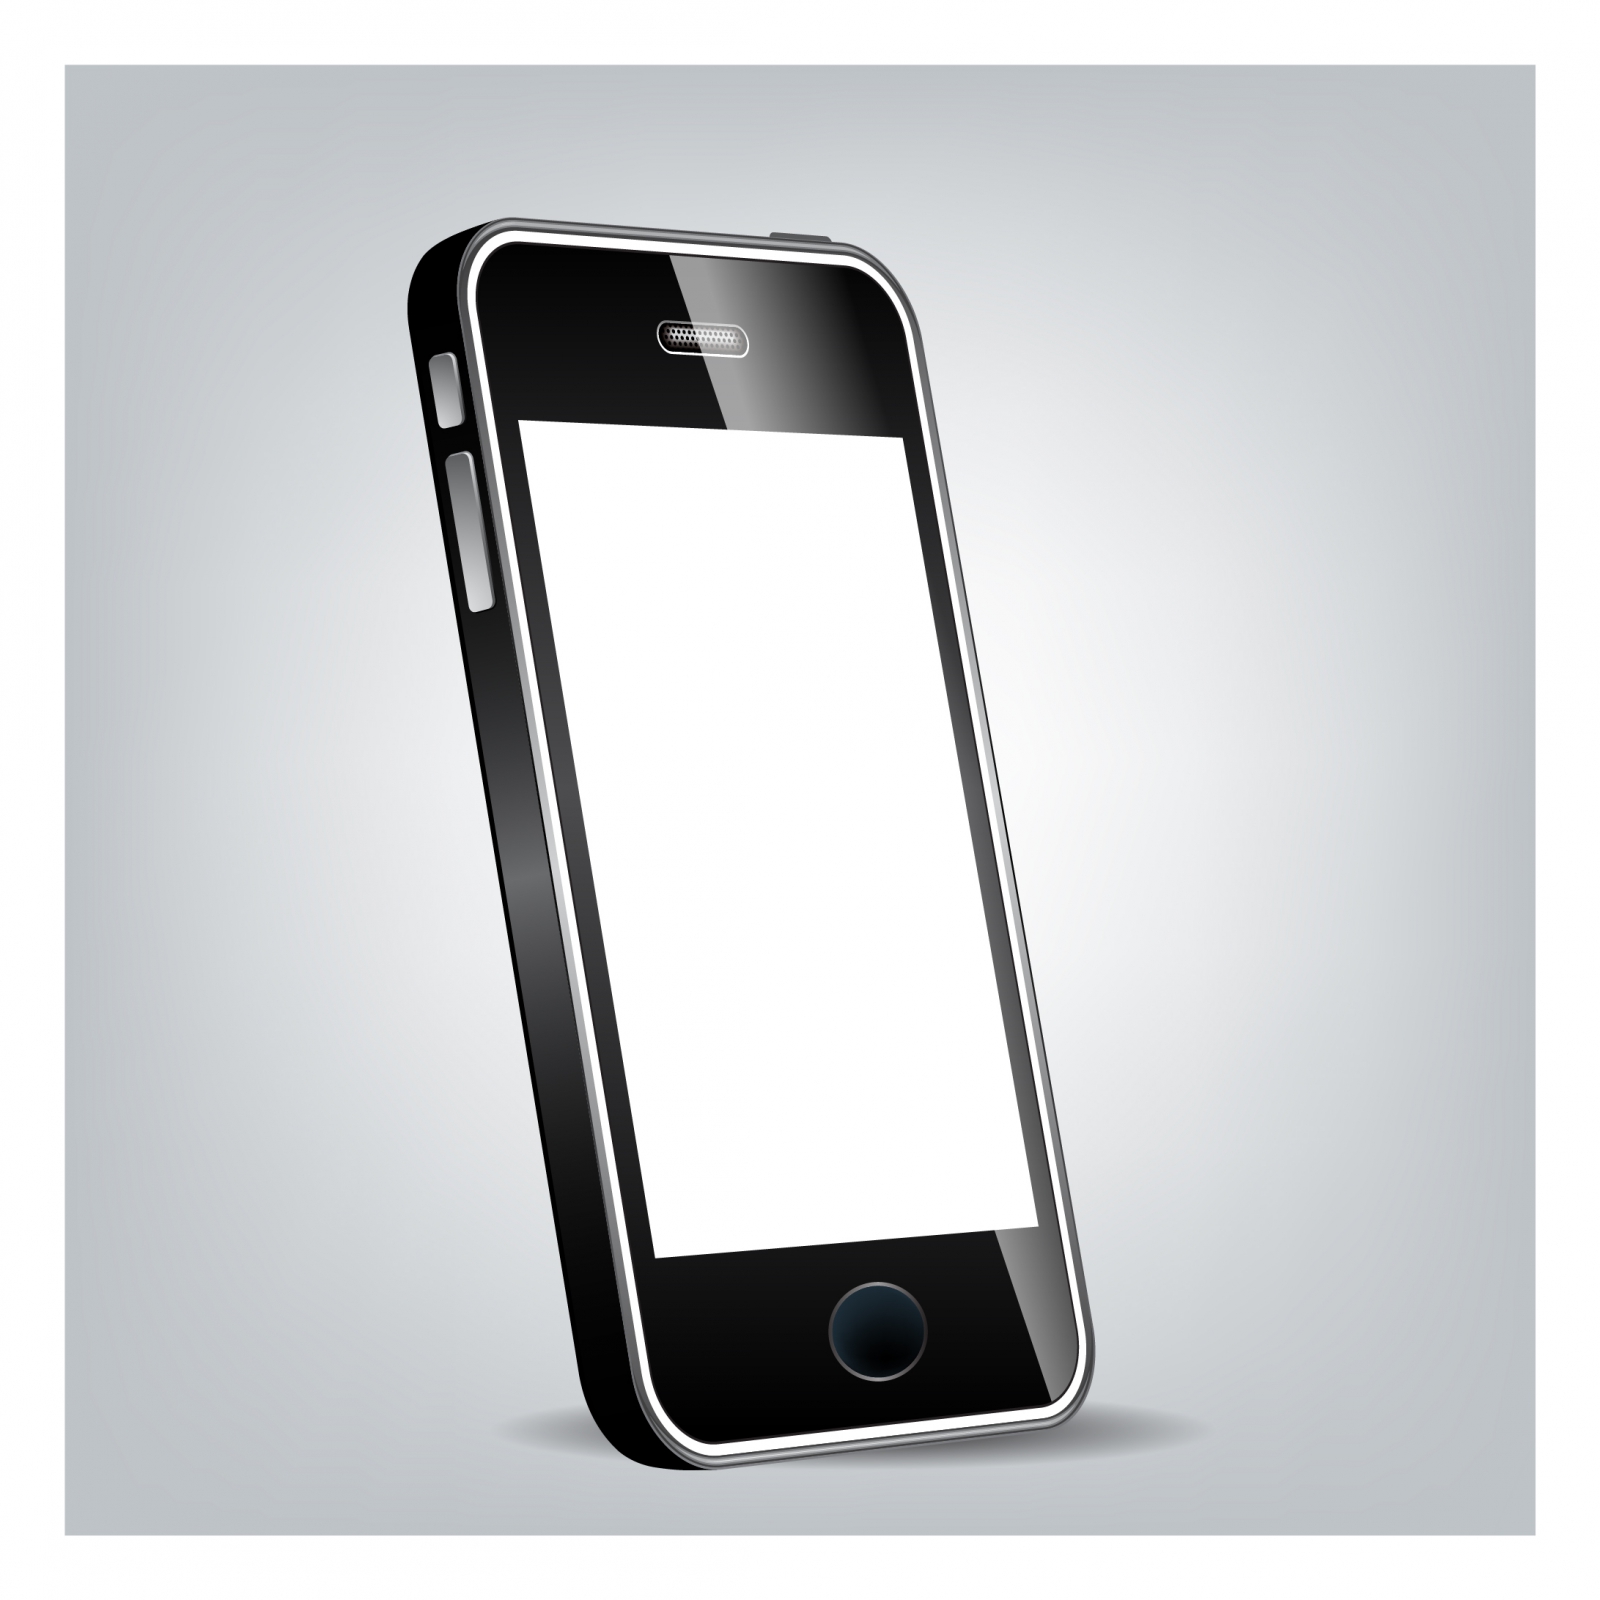 Mobile Phone Vector Free Download